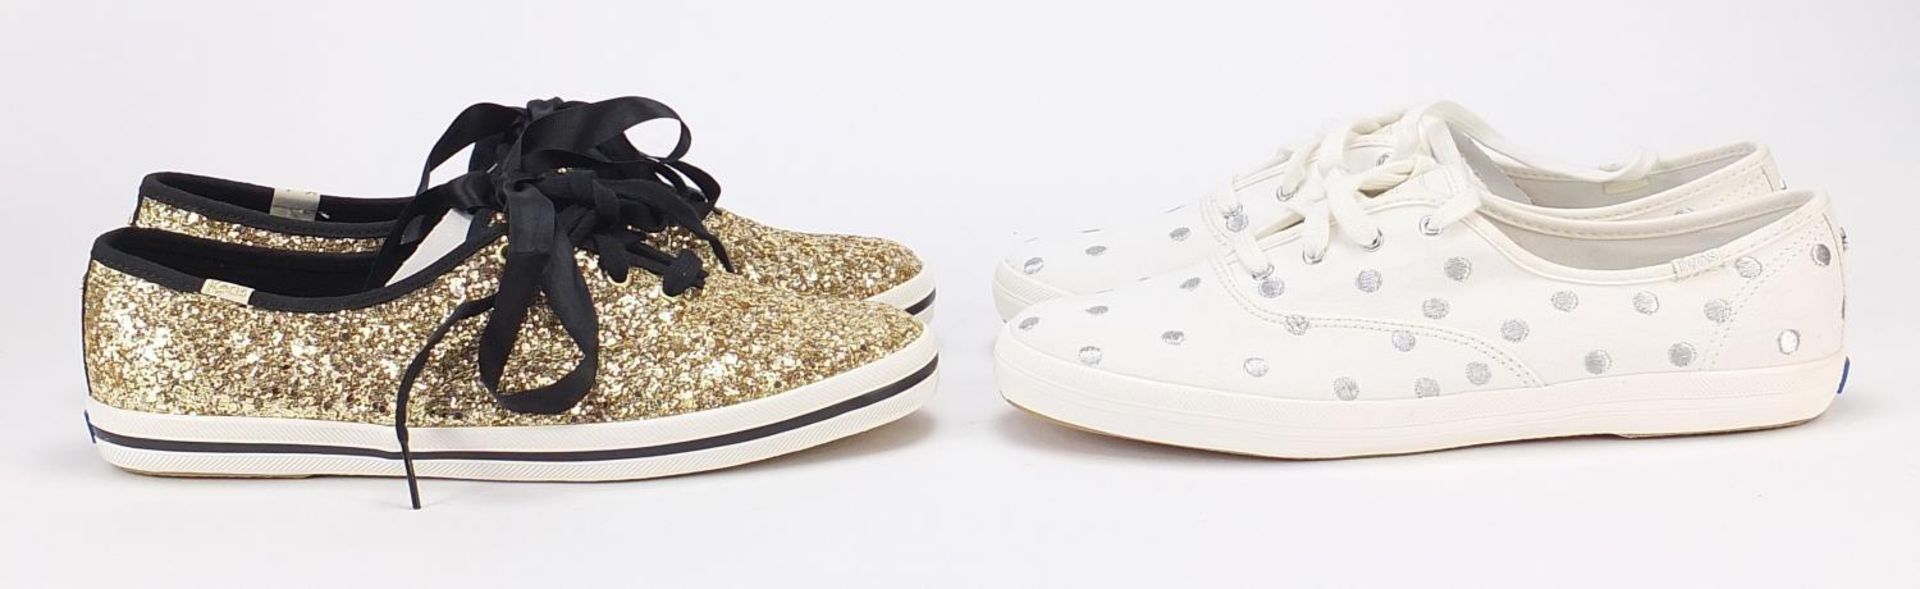 Two pairs of Kate Spade sneakers - Image 4 of 6